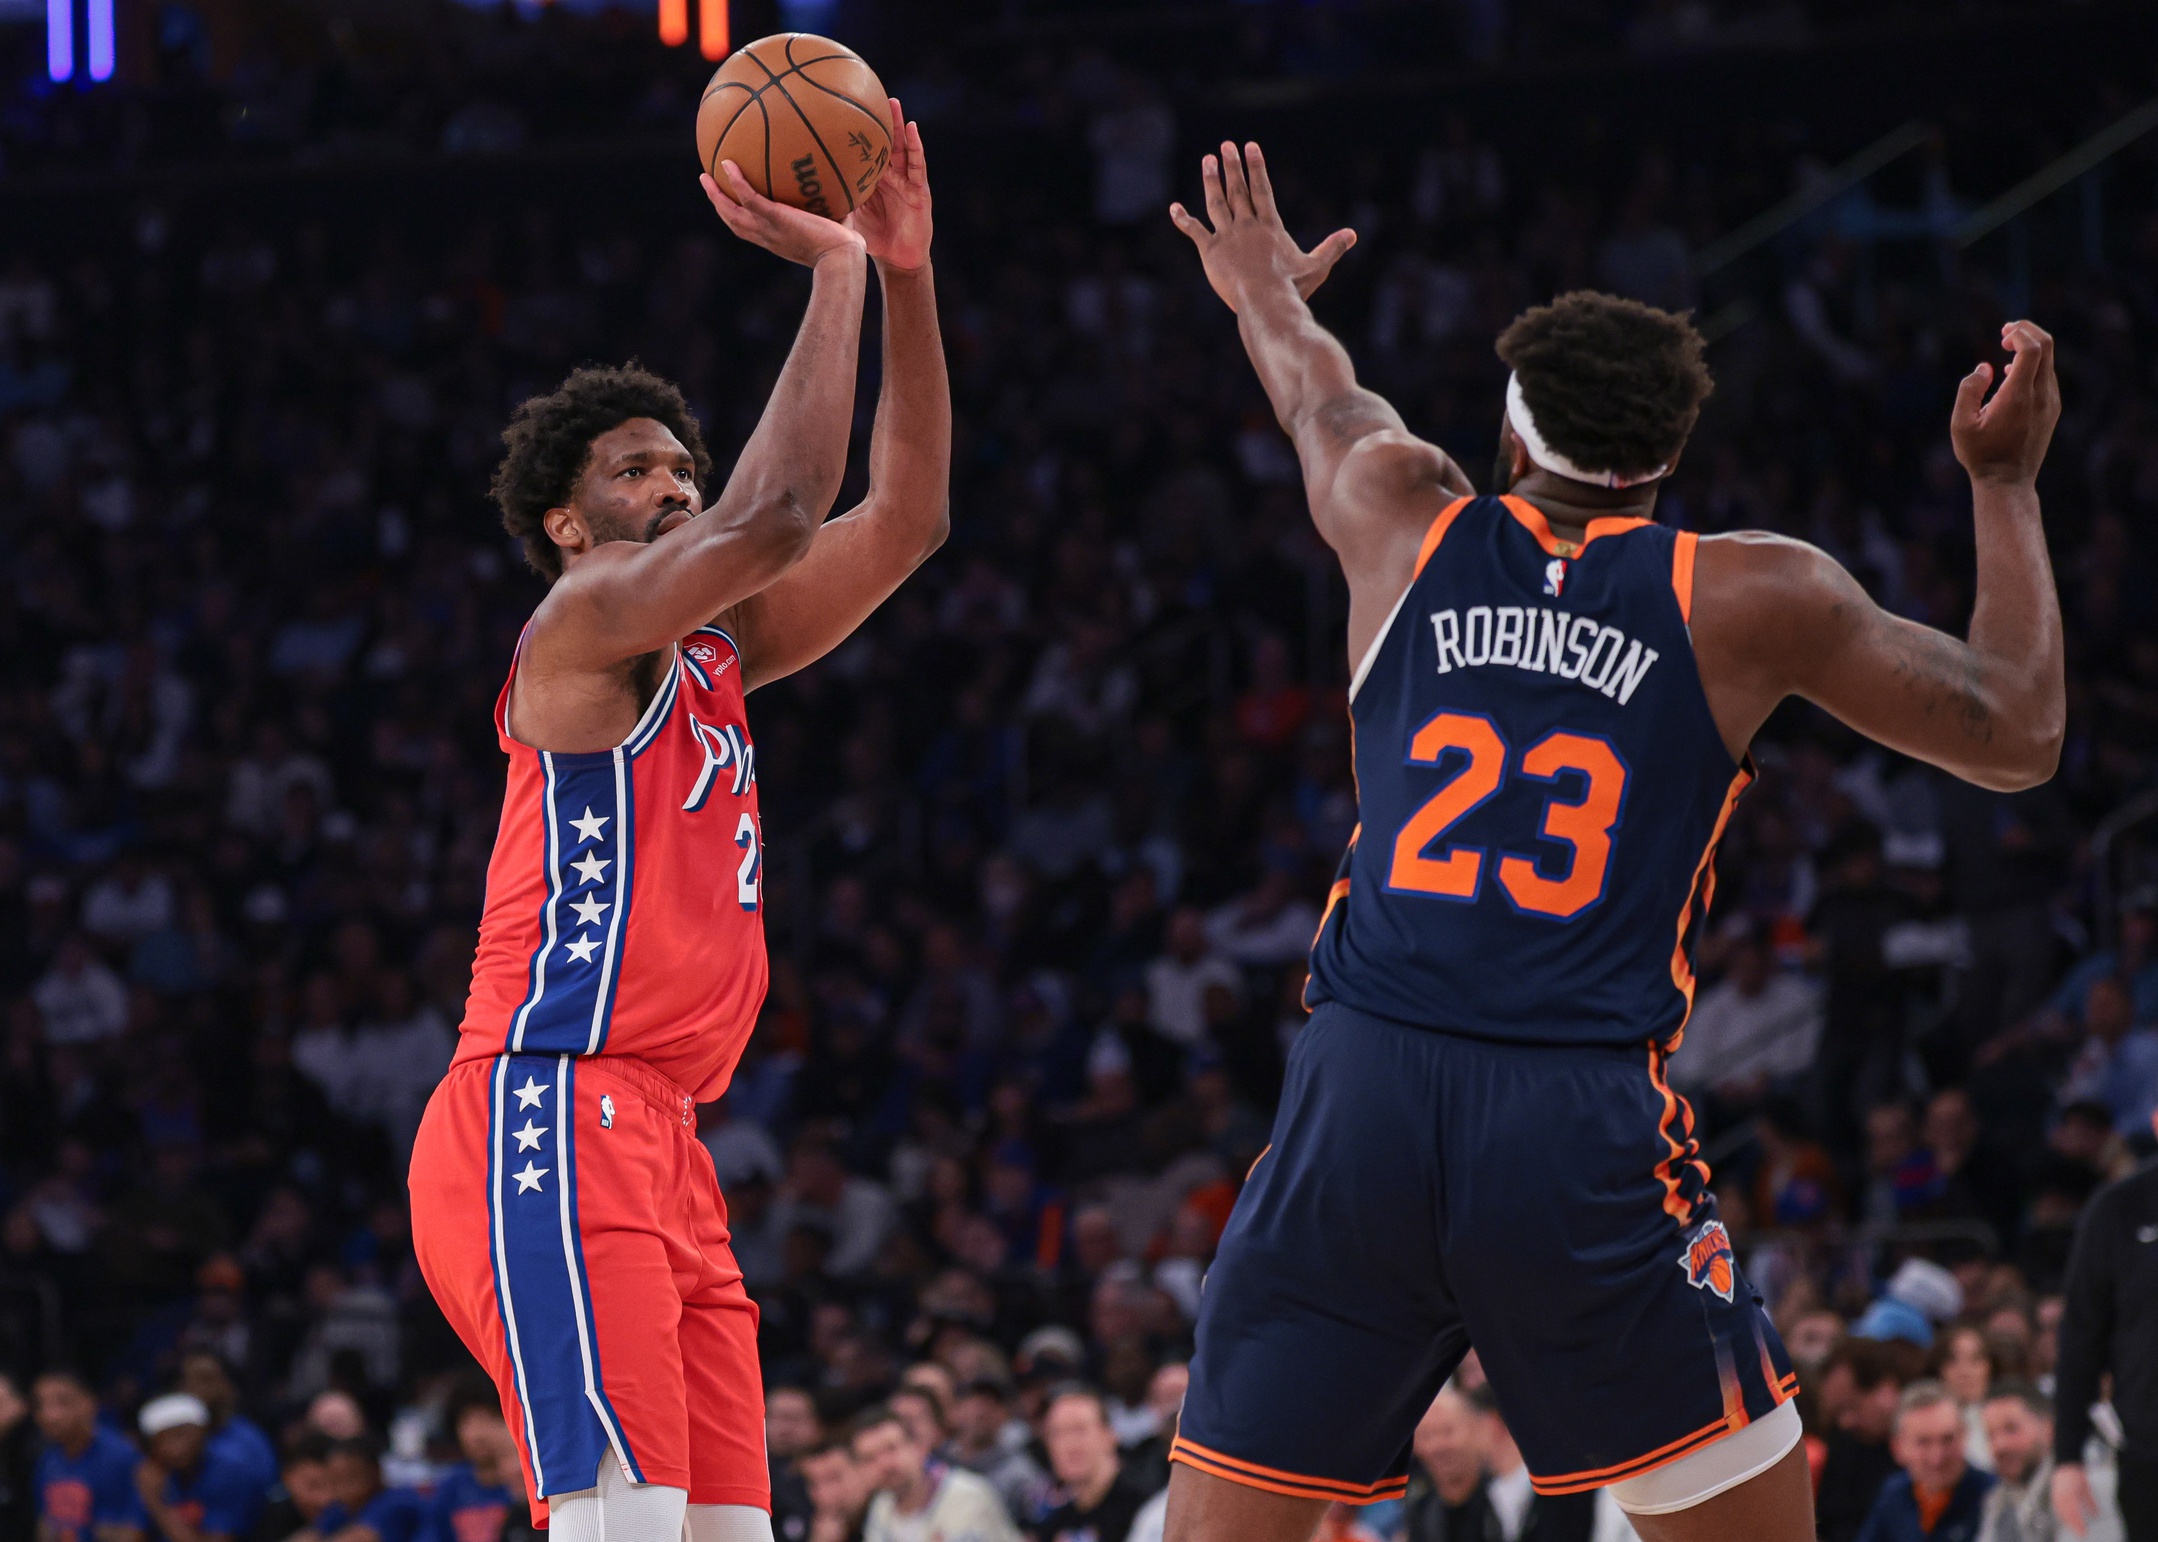 New York Knicks center Mitchell Robinson and Philadelphia 76ers center Joel Embiid, limited by injury